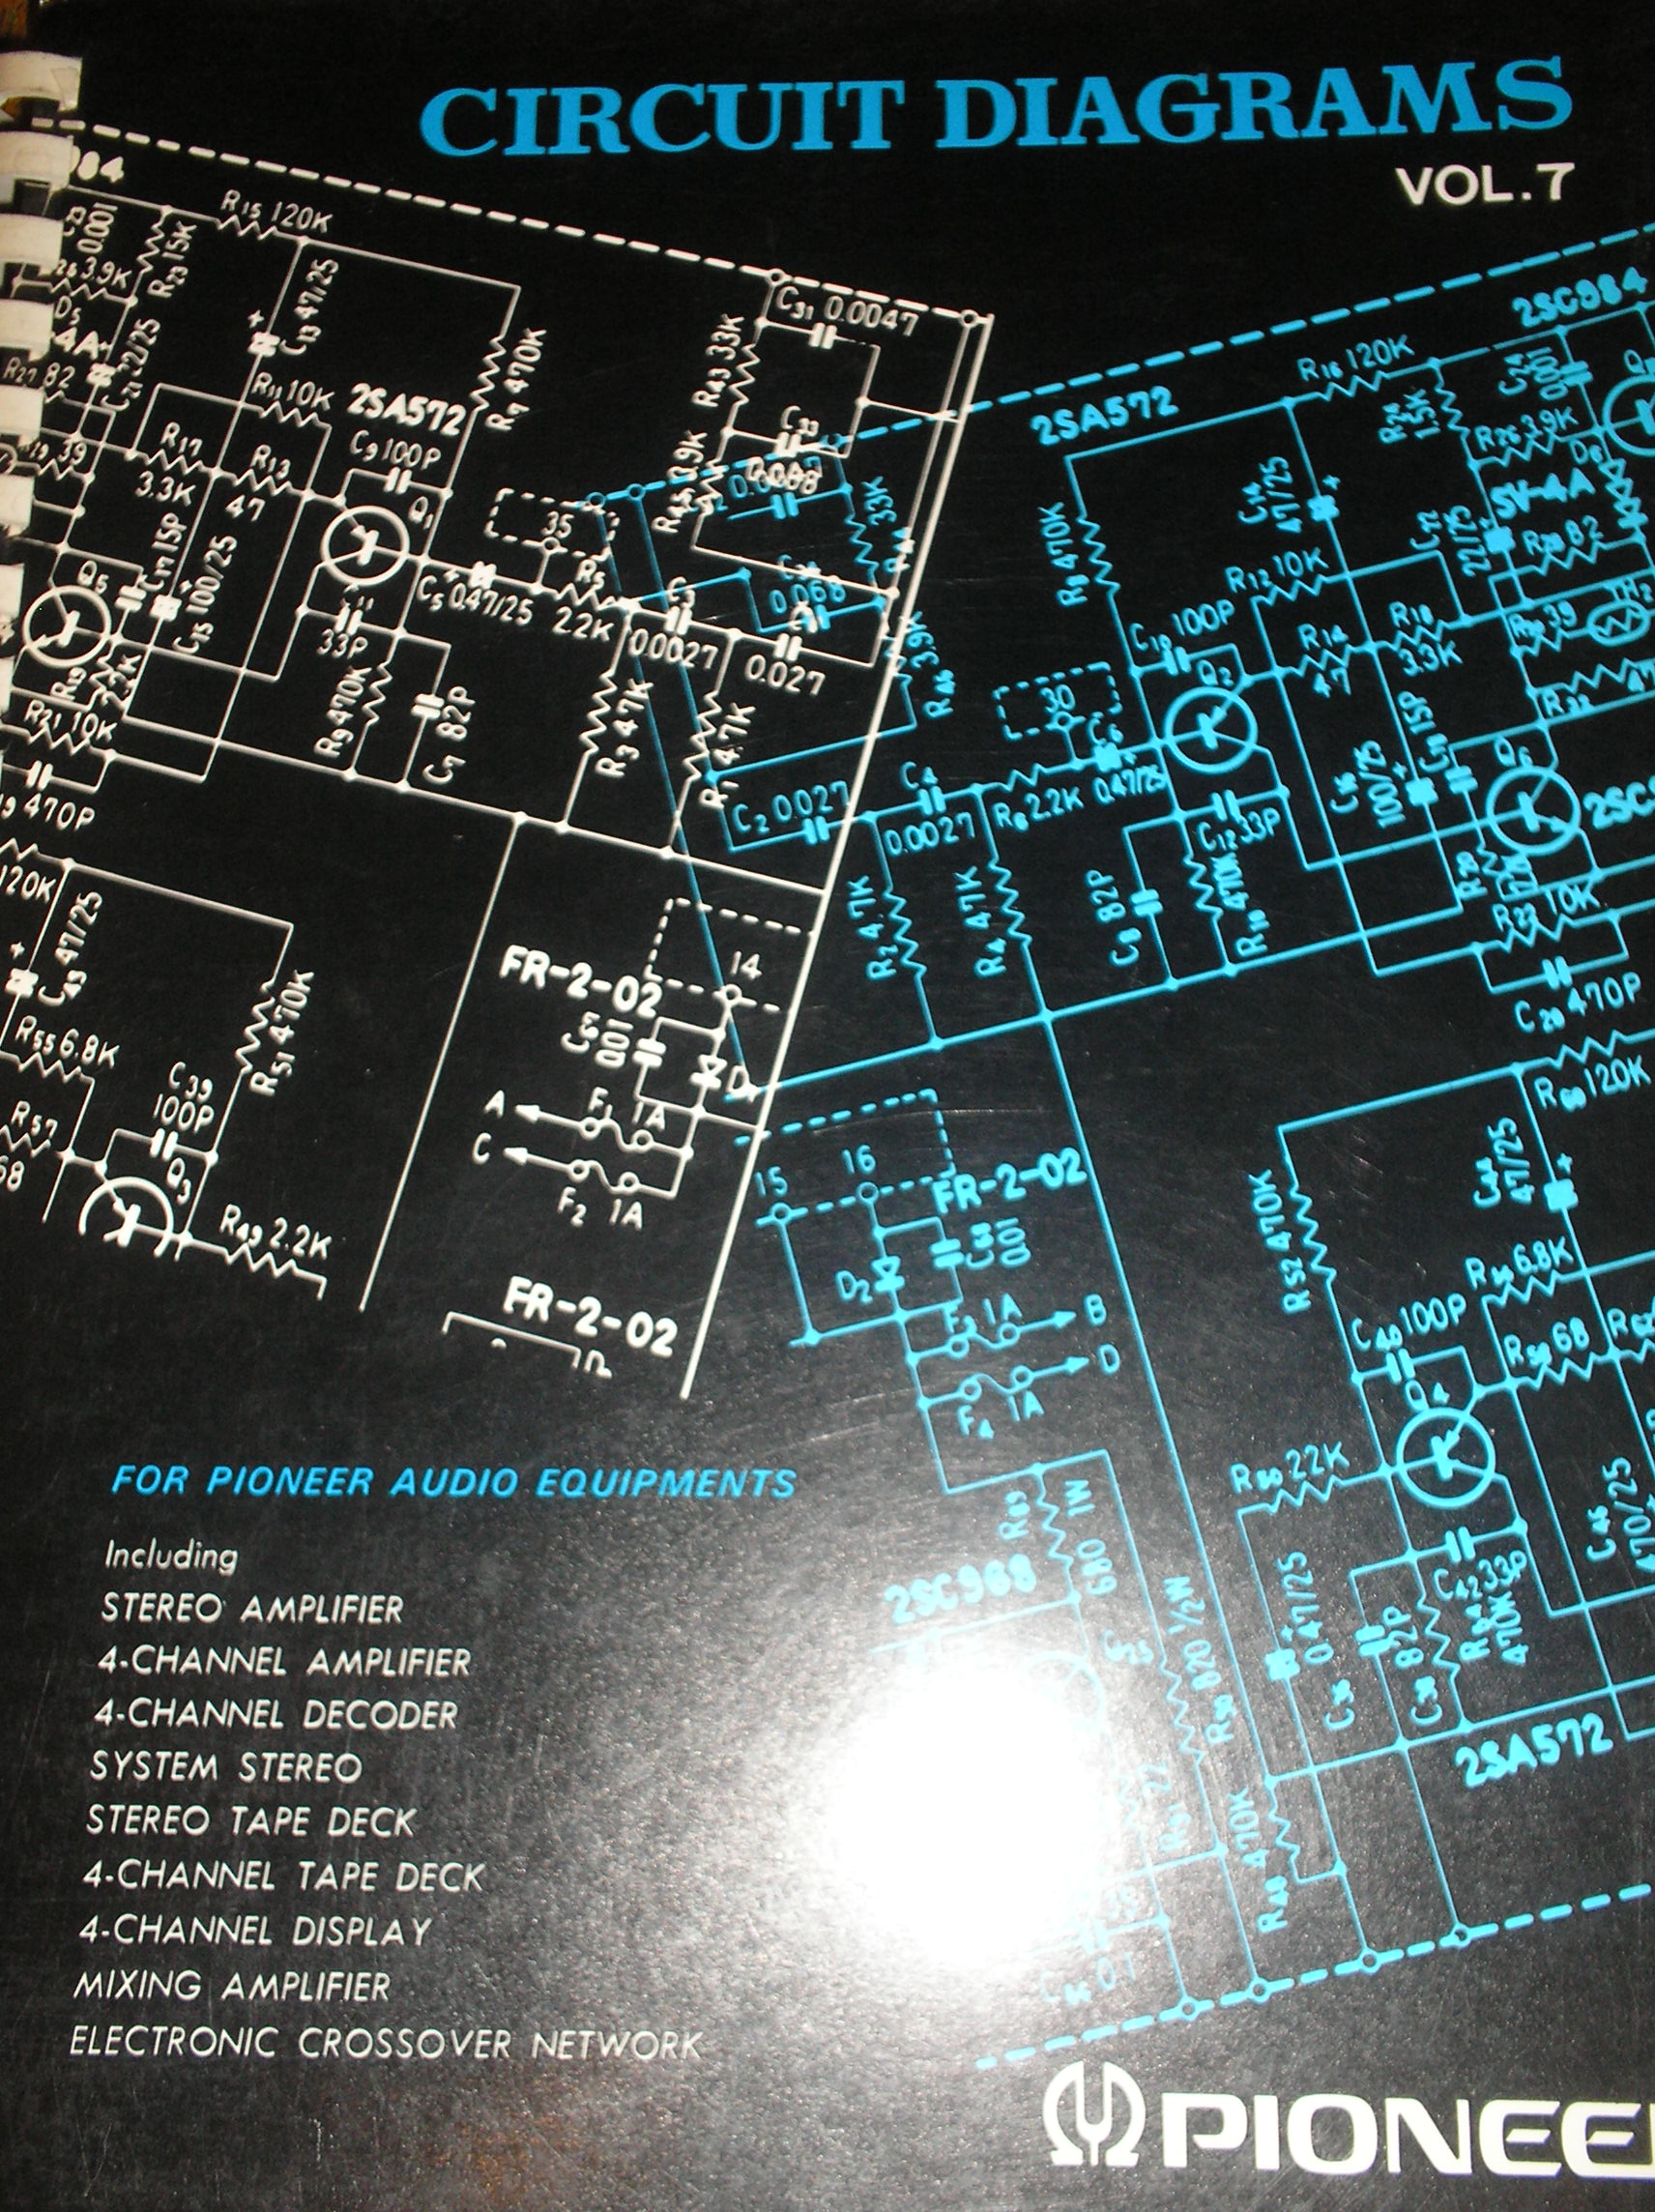 4000 Prelude Stereo System fold out schematics.   Book 7